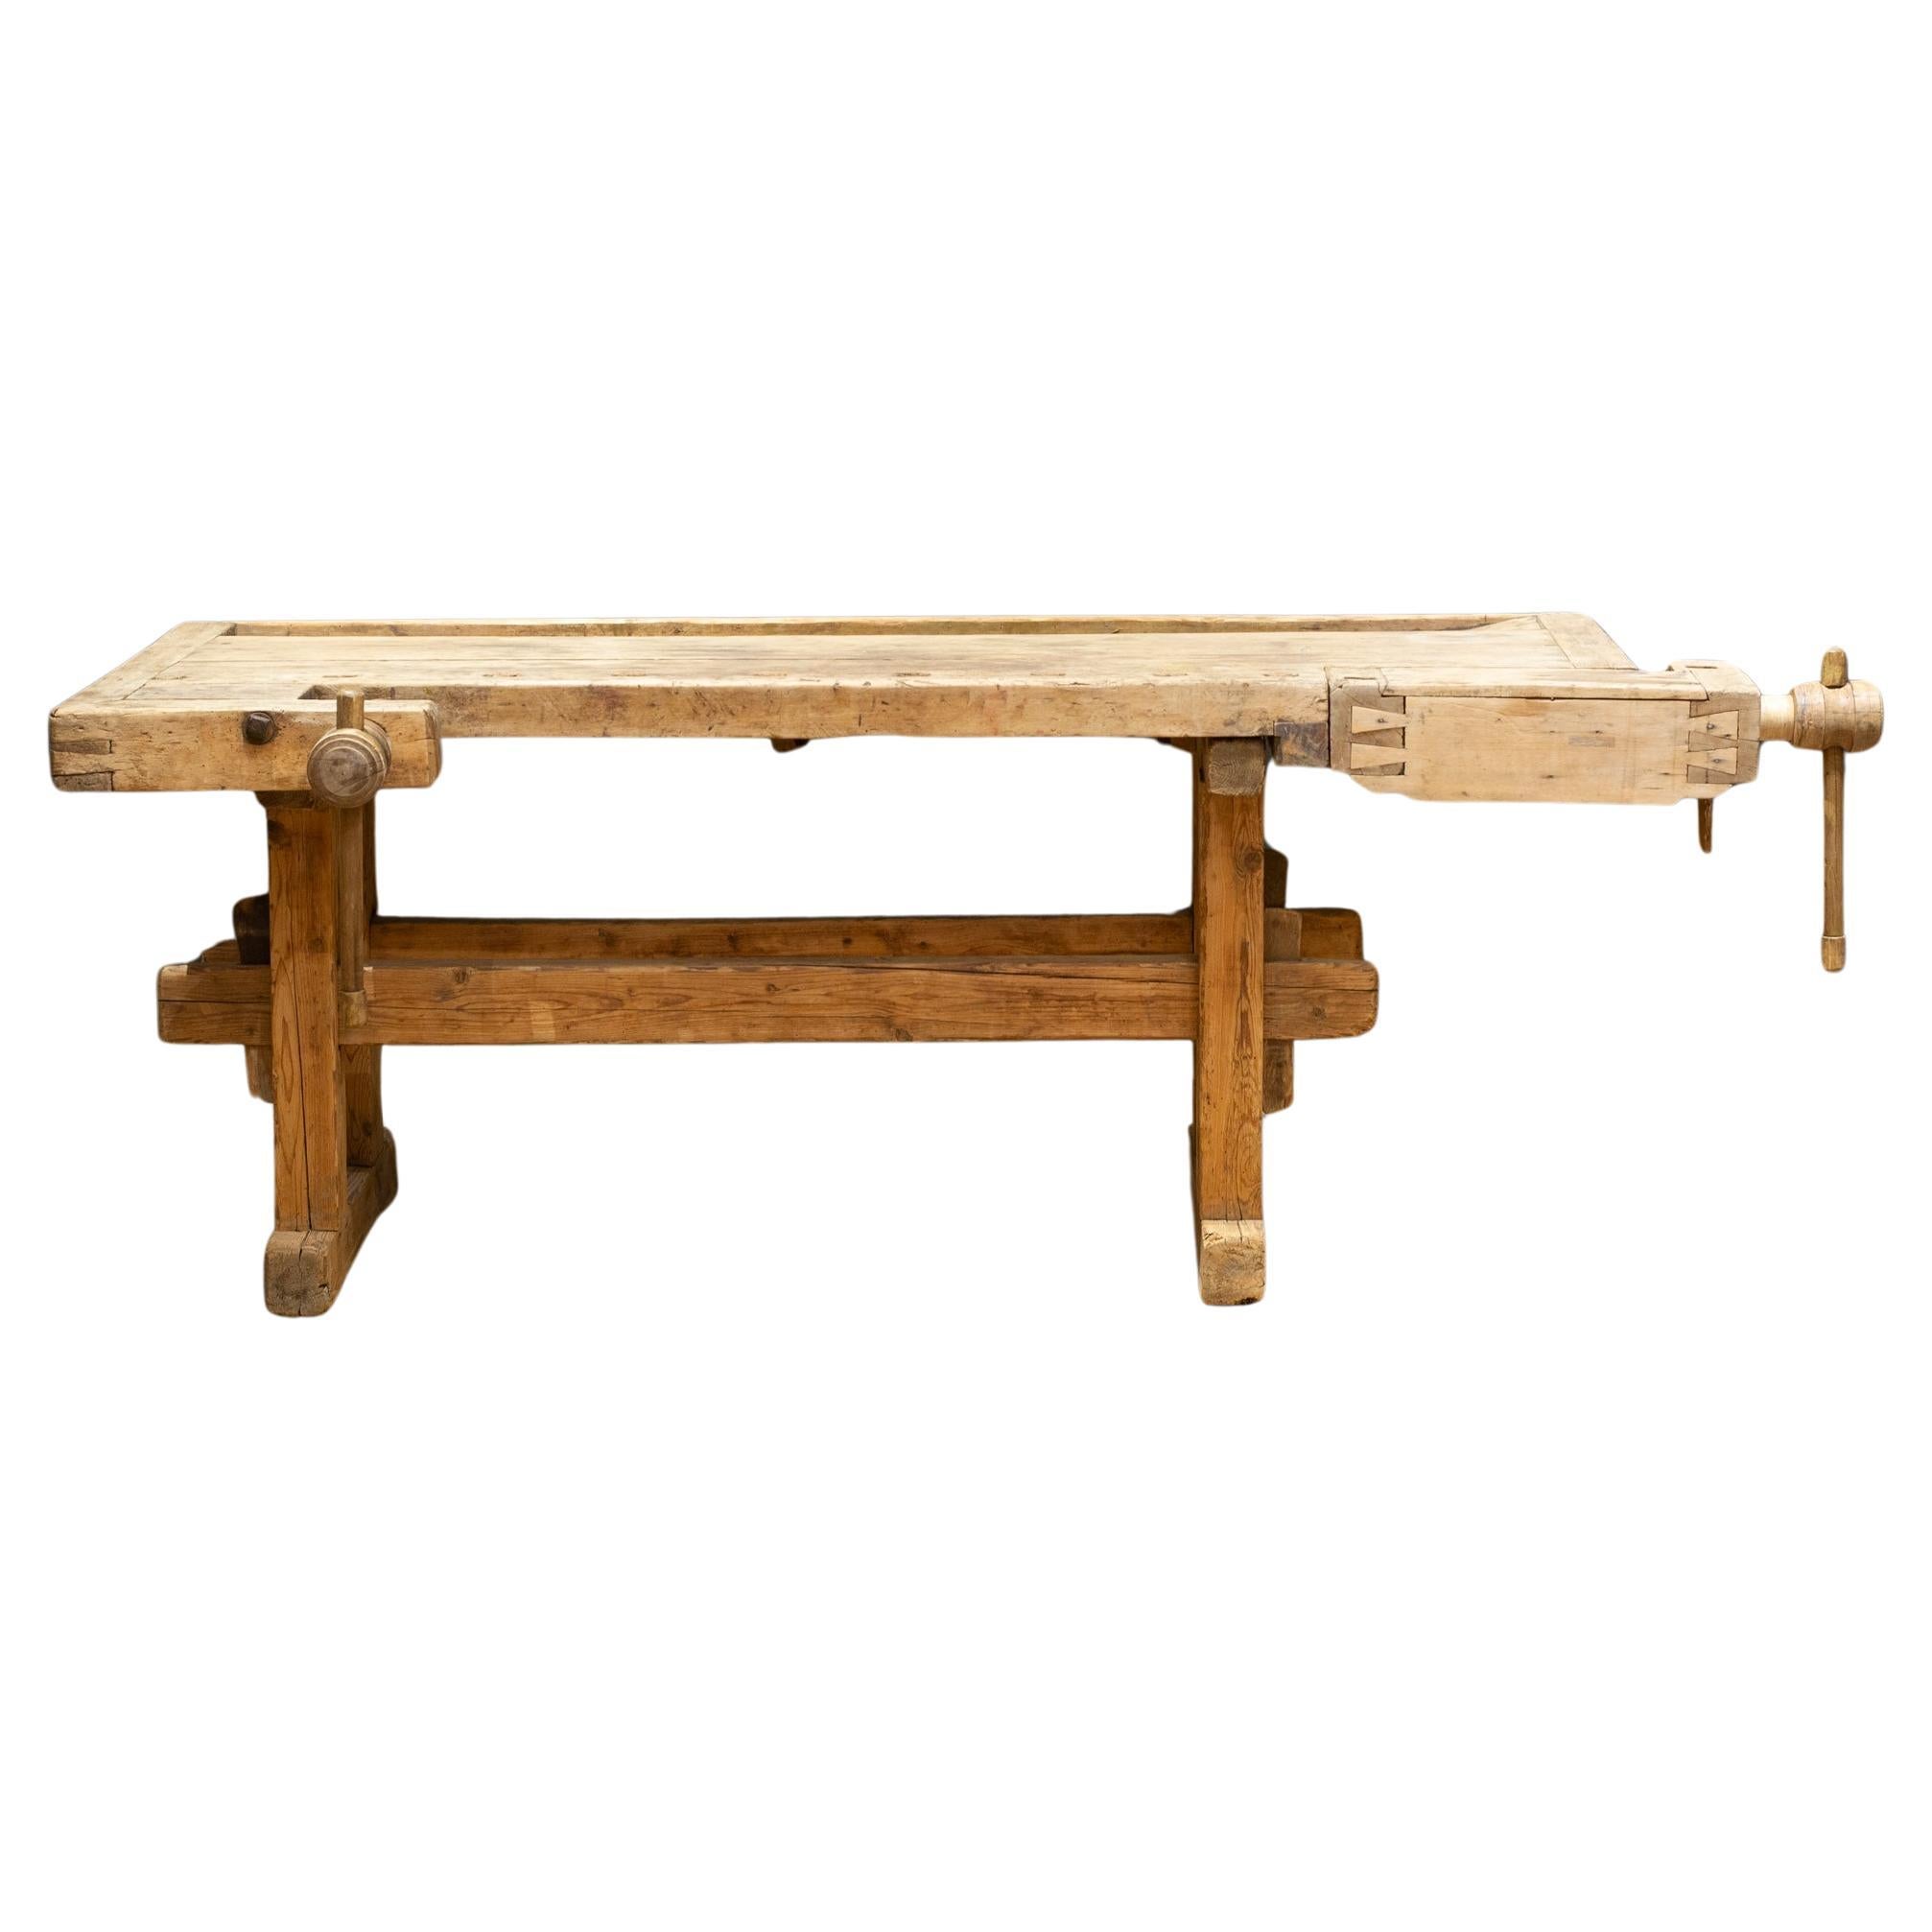 Late 19th c. Scrubbed Carpenter's Workbench c.1880-1900 For Sale